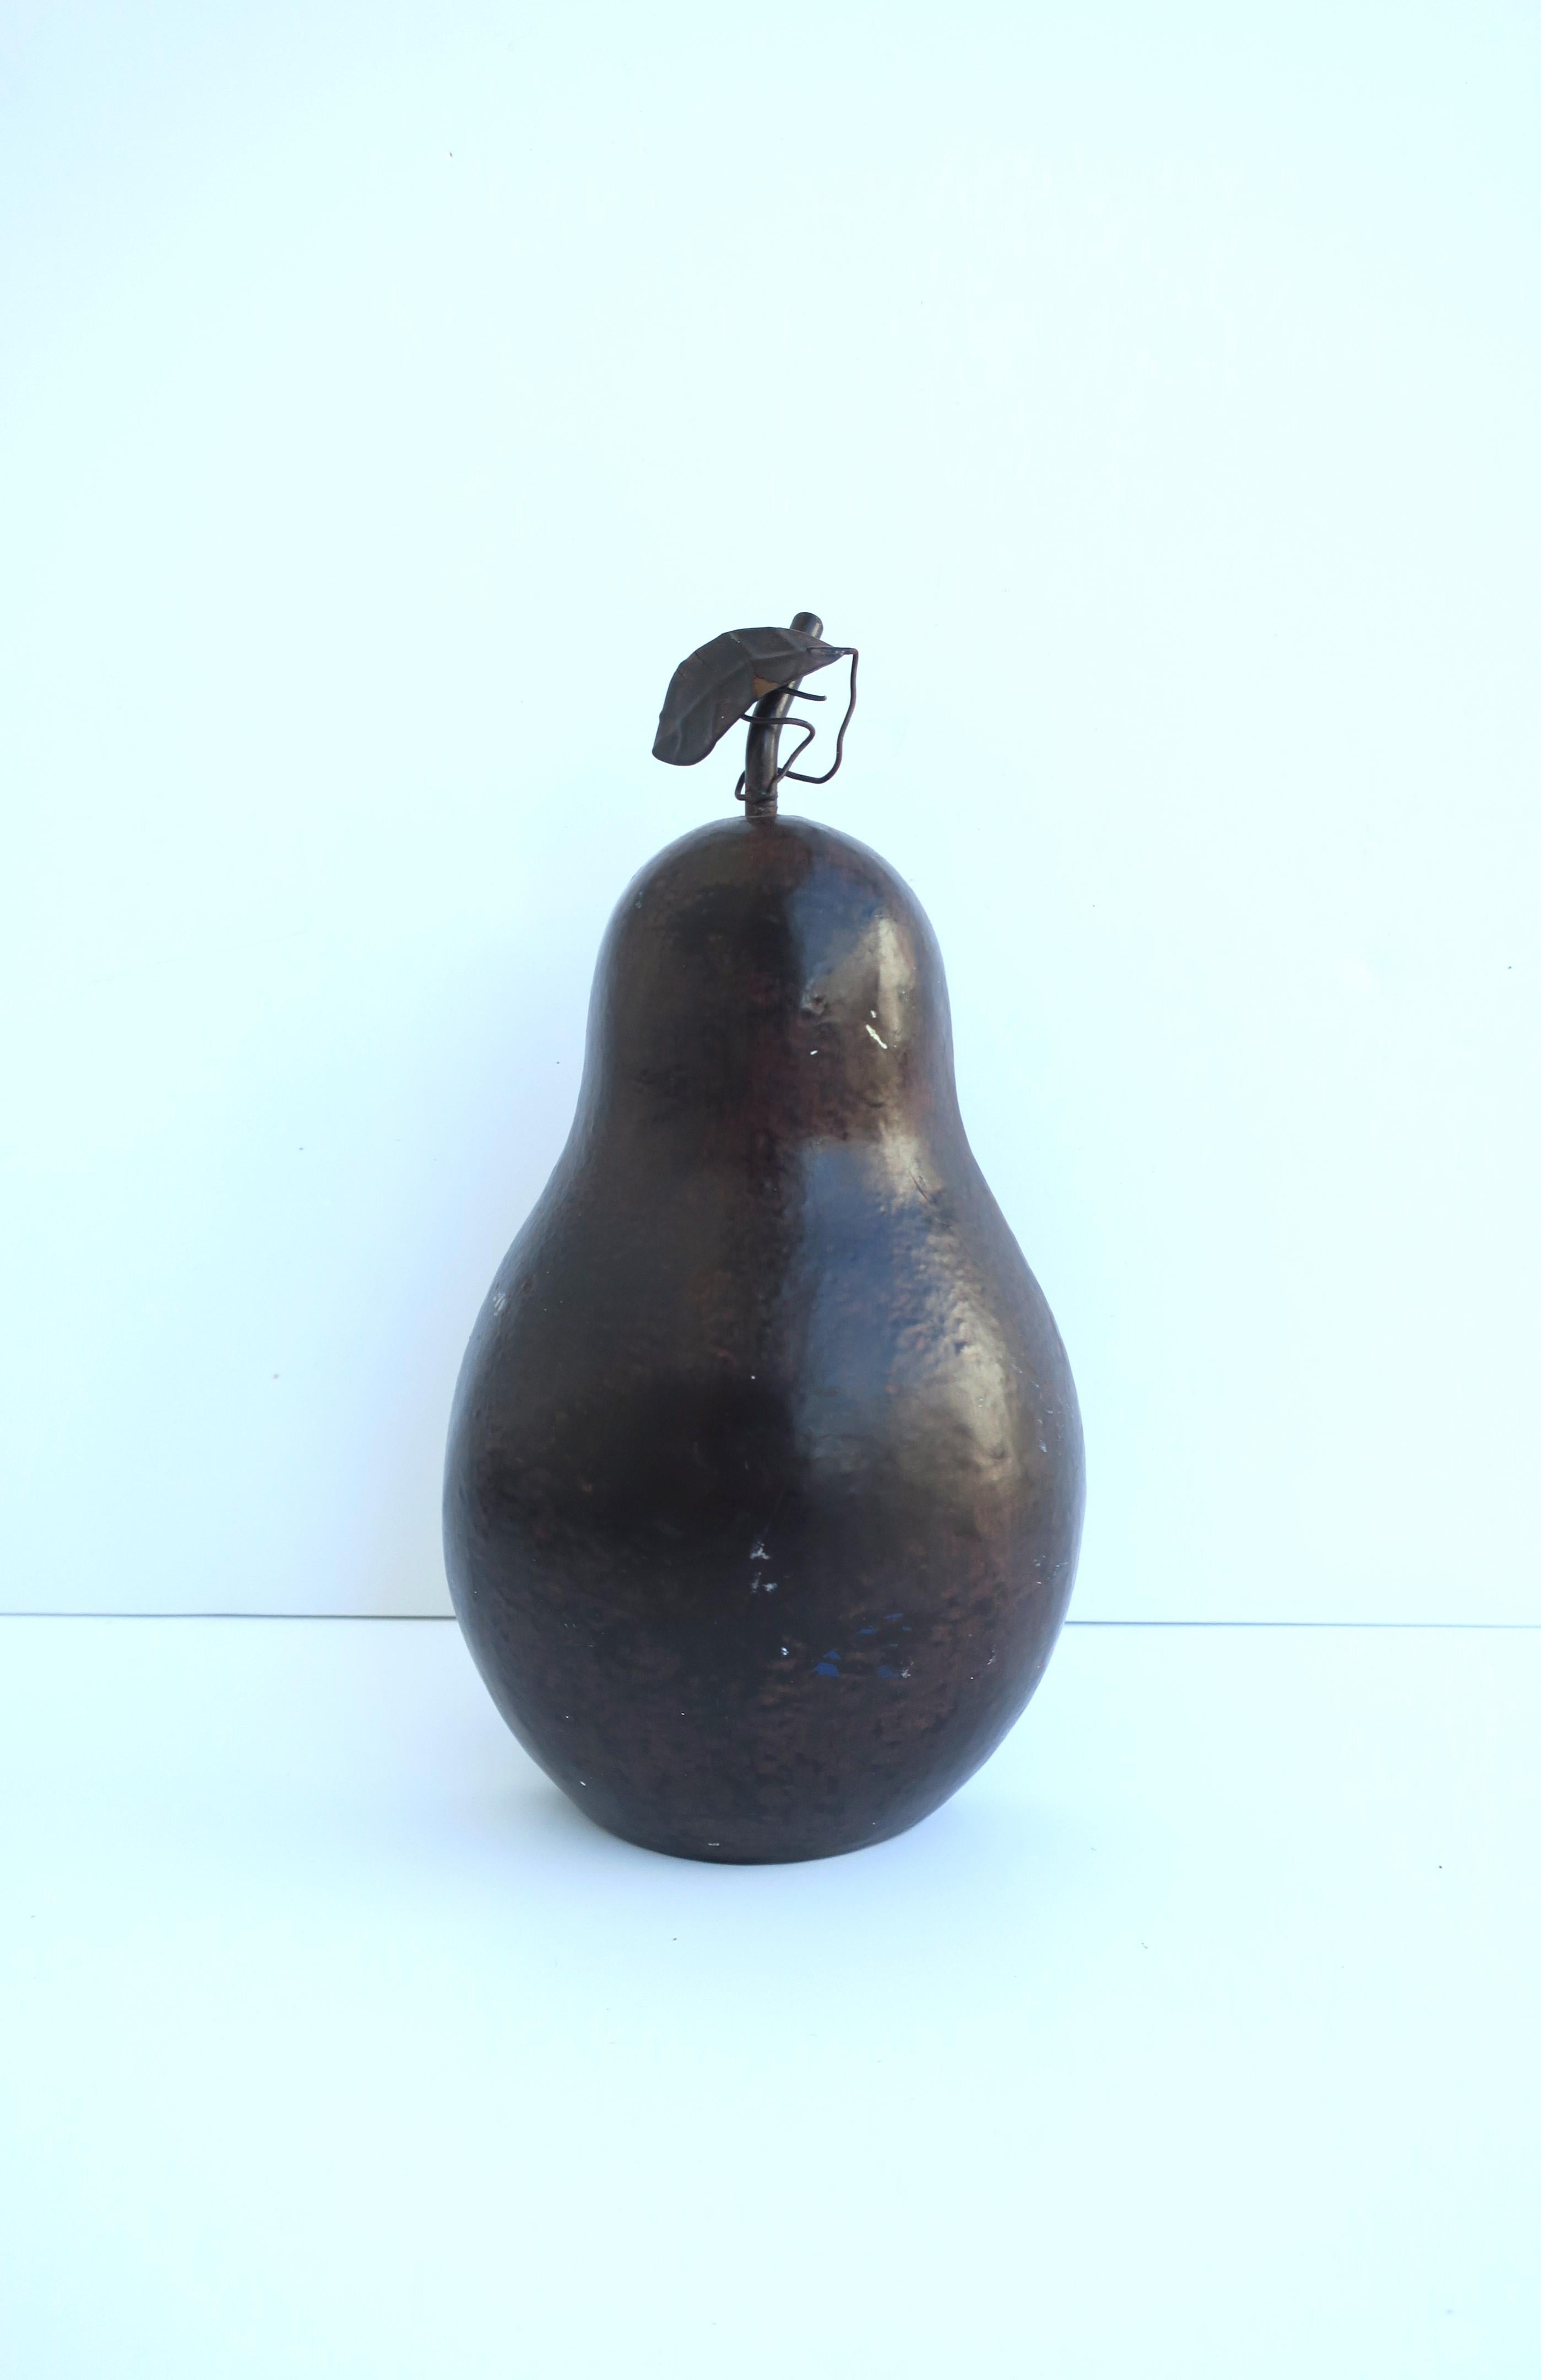 A cast iron pear fruit doorstop, (door stop, doorstopper), with a dark brown enamel surface and leaf detail, circa mid-20th century. Dimensions: 8.25